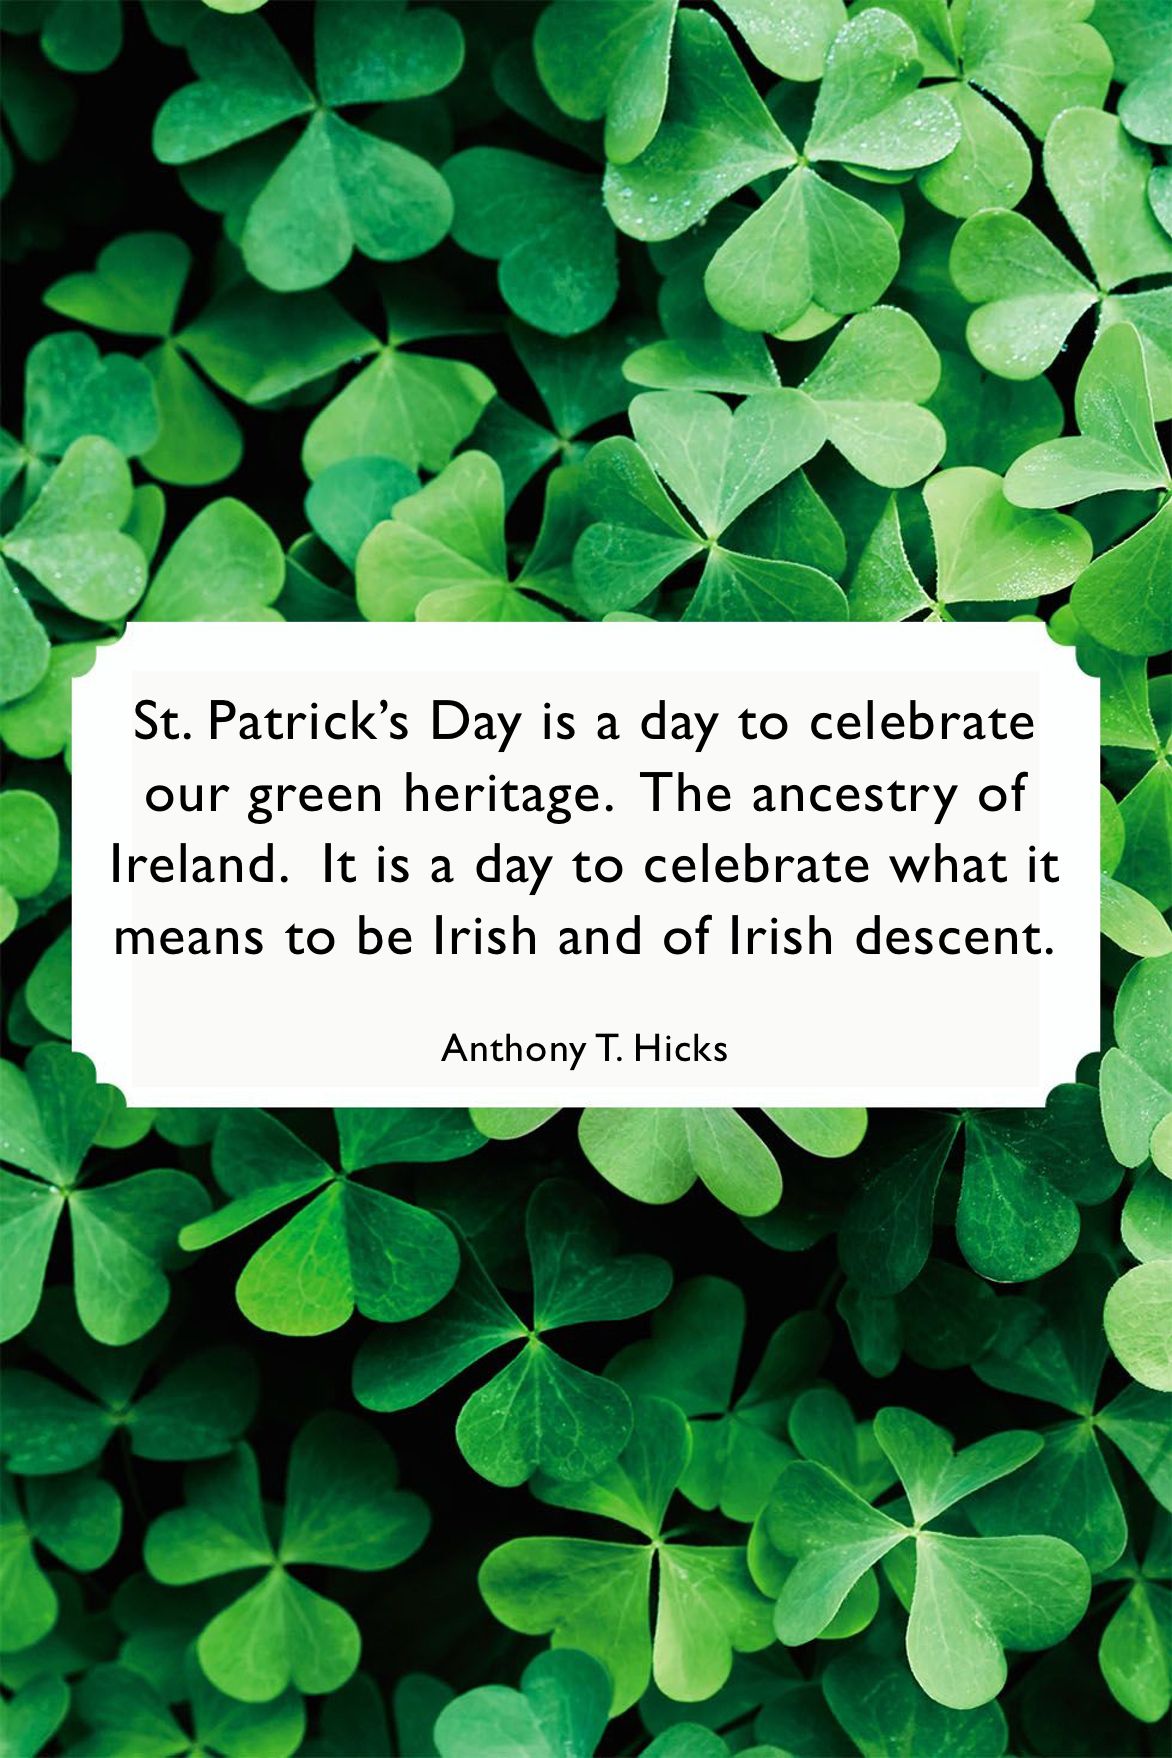 St. Patrick's Day 2023 - Raise Your Greens to Celebrate! - Article